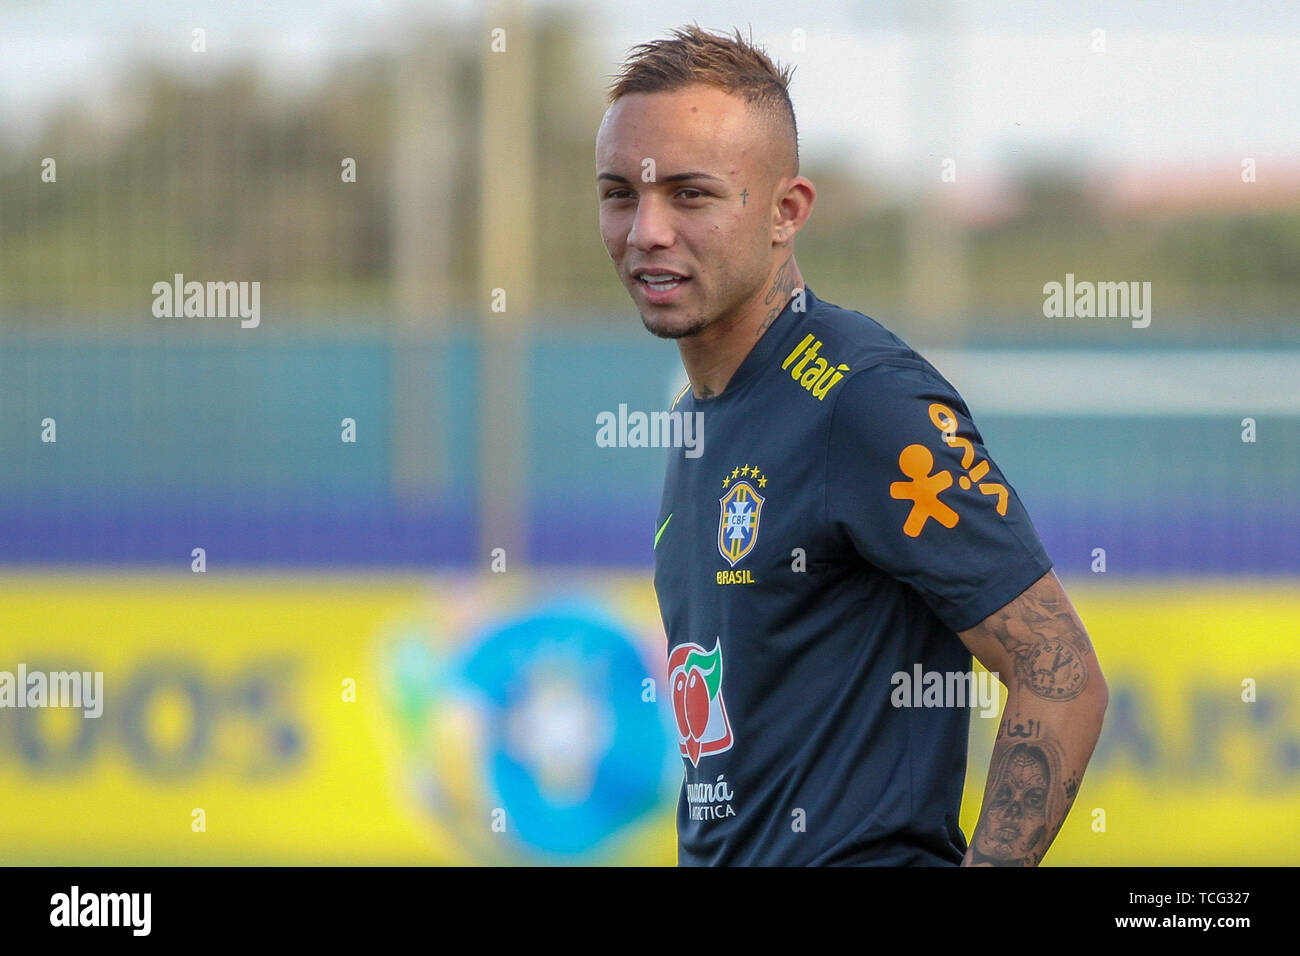 Porto Alegre, Brazil. 7th June, 2019. Training session of the Brazilian national football team - Everton before their international game against Honduras on 9th June Credit: Action Plus Sports/Alamy Live News Stock Photo